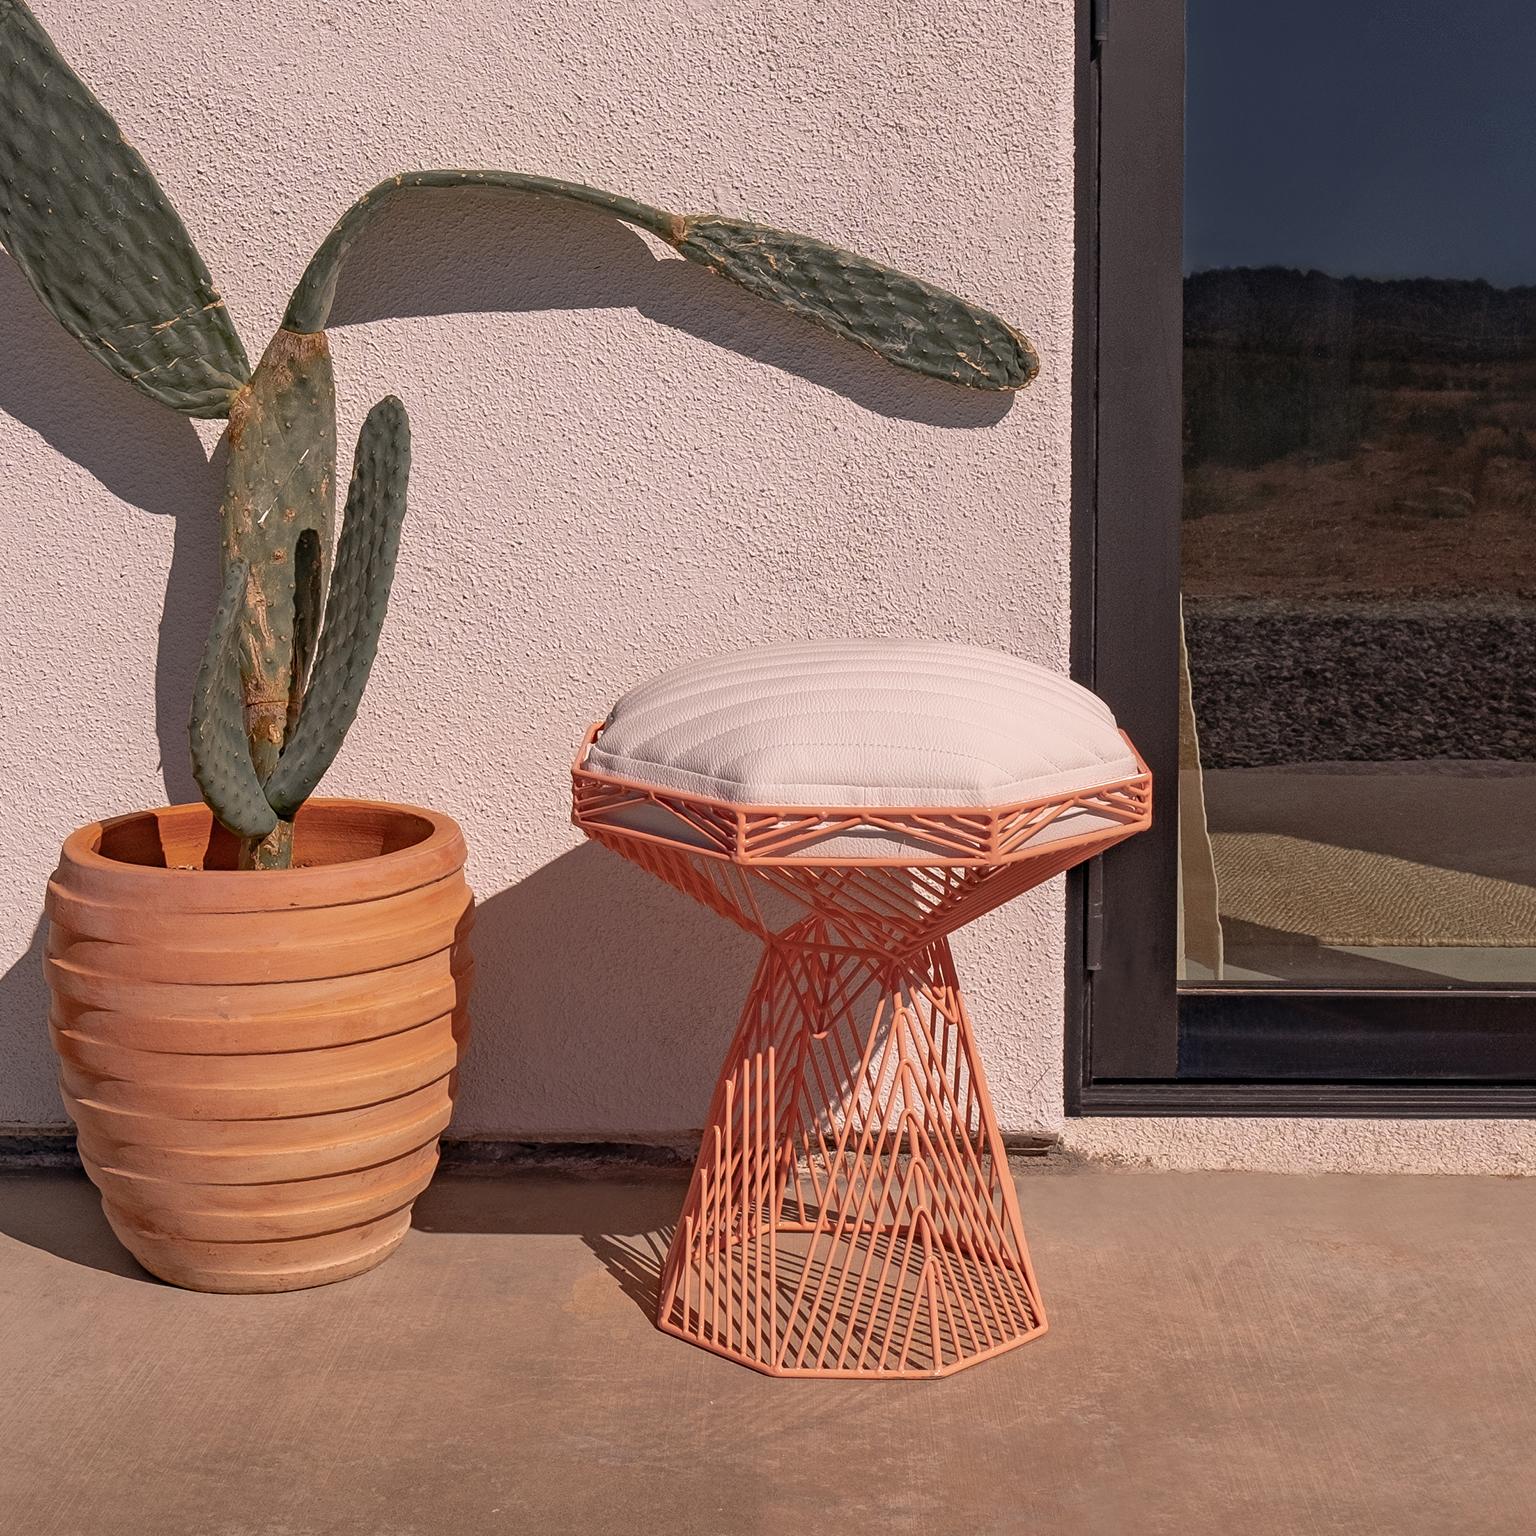 Contemporary Modern Wire Stool, in Peachy Pink with a Reversible Black Leather Top